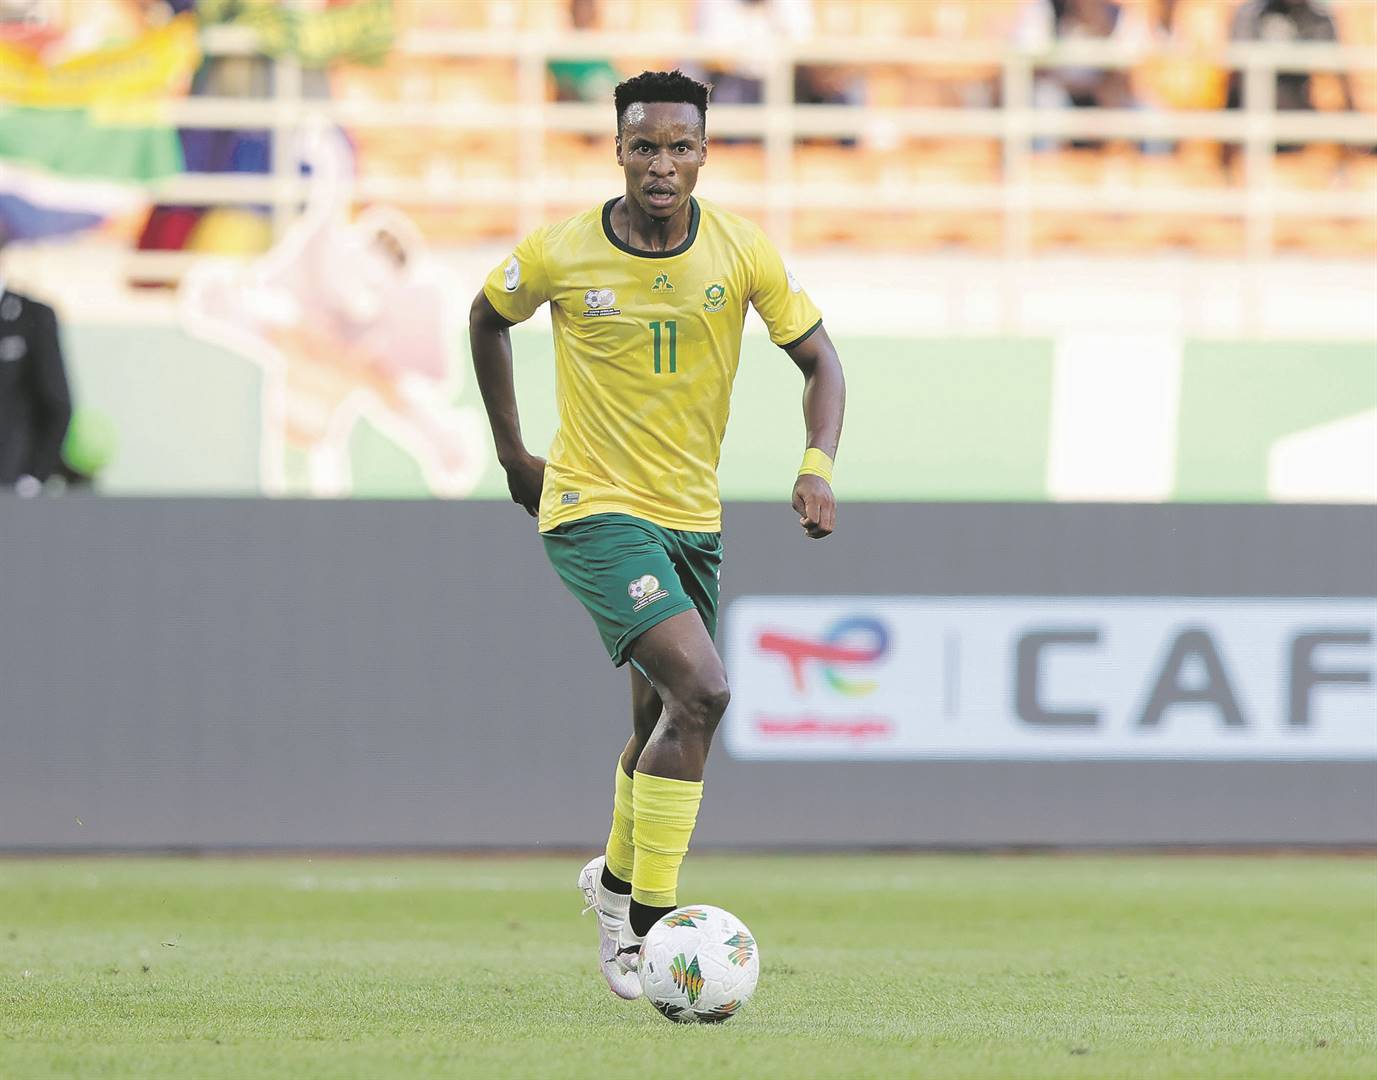 Bafana Bafana midfielder Themba Zwane was voted player of the match in two out of the three Afcon group stage matches.